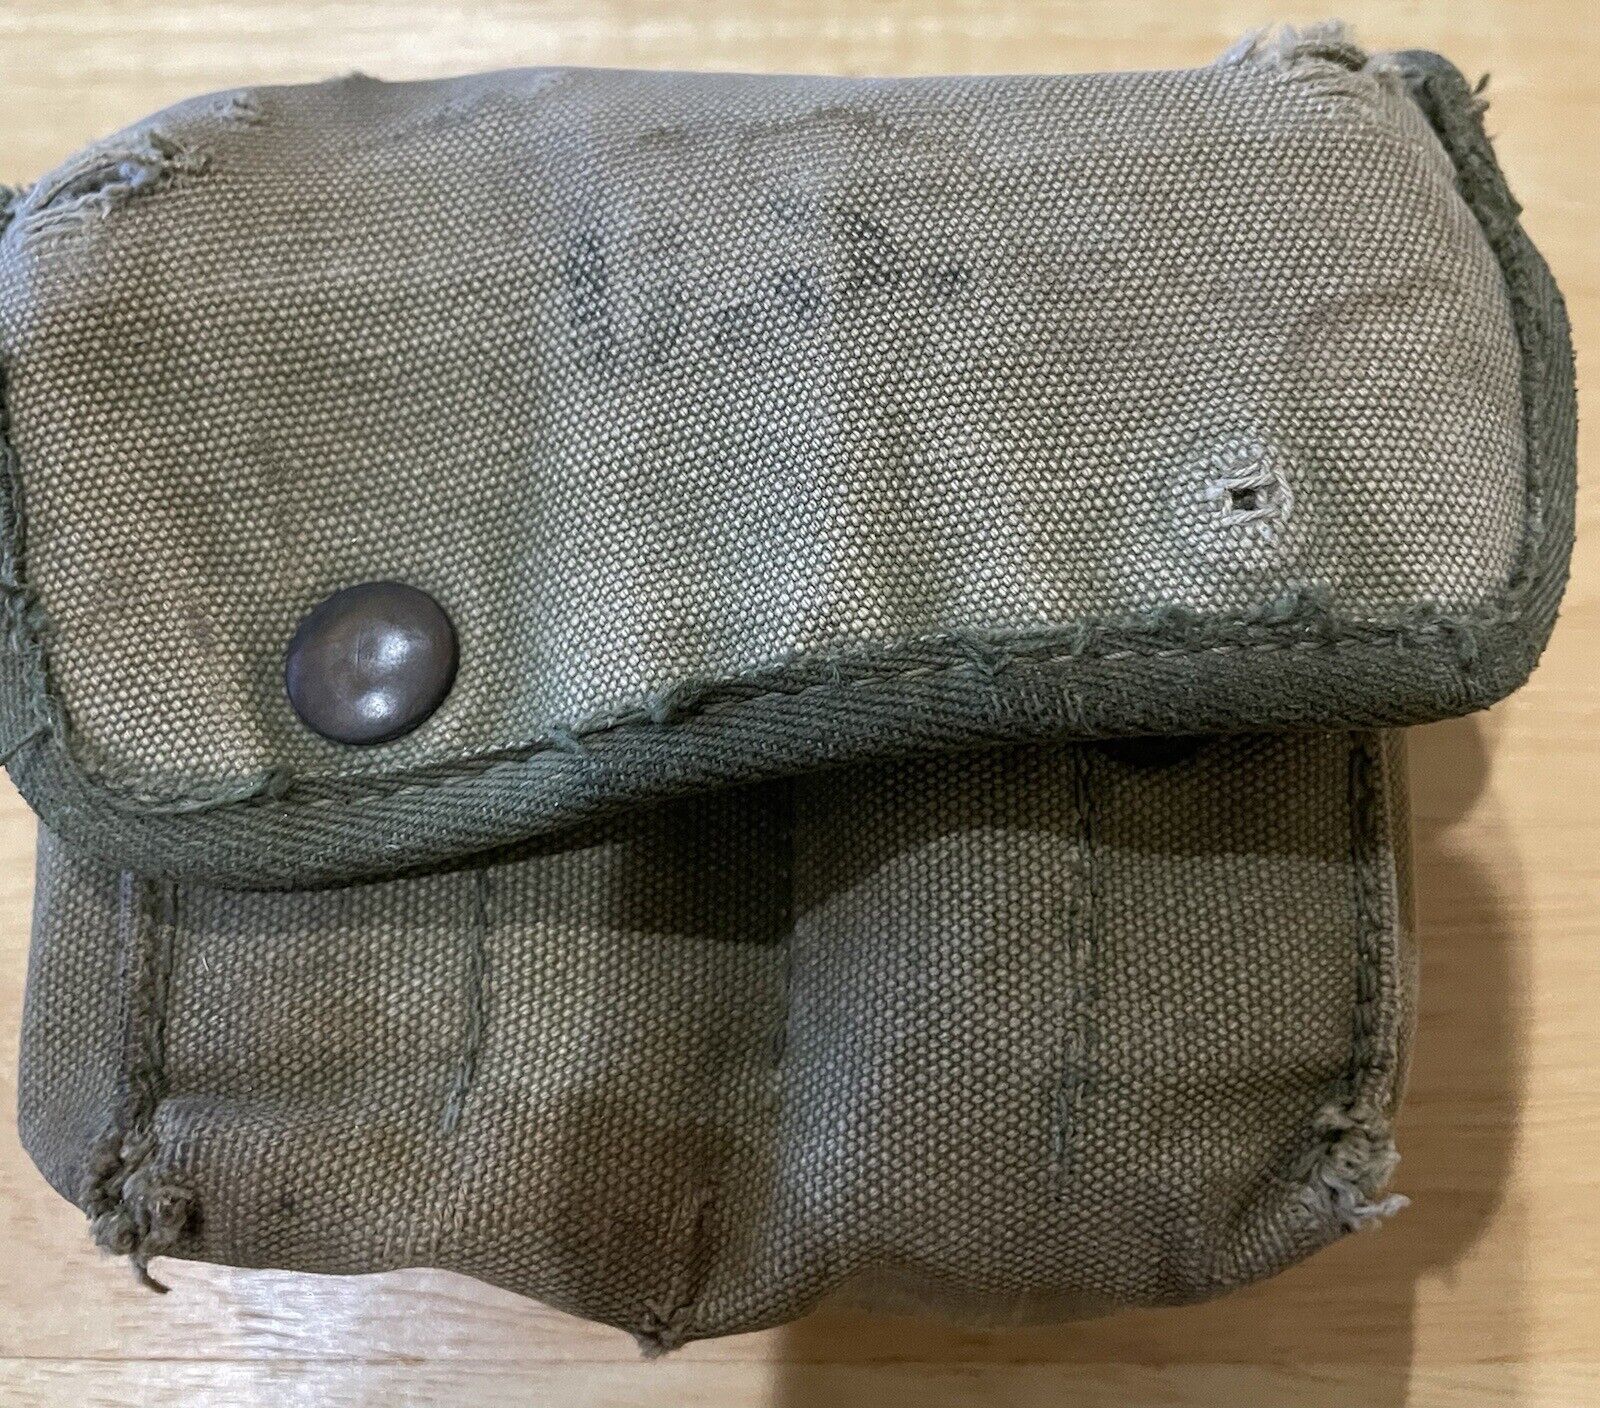 Genuine WW2 Combat Jungle First Aid Kit Pouch, G.B. MFG. Co 1943 Full Of Supplys